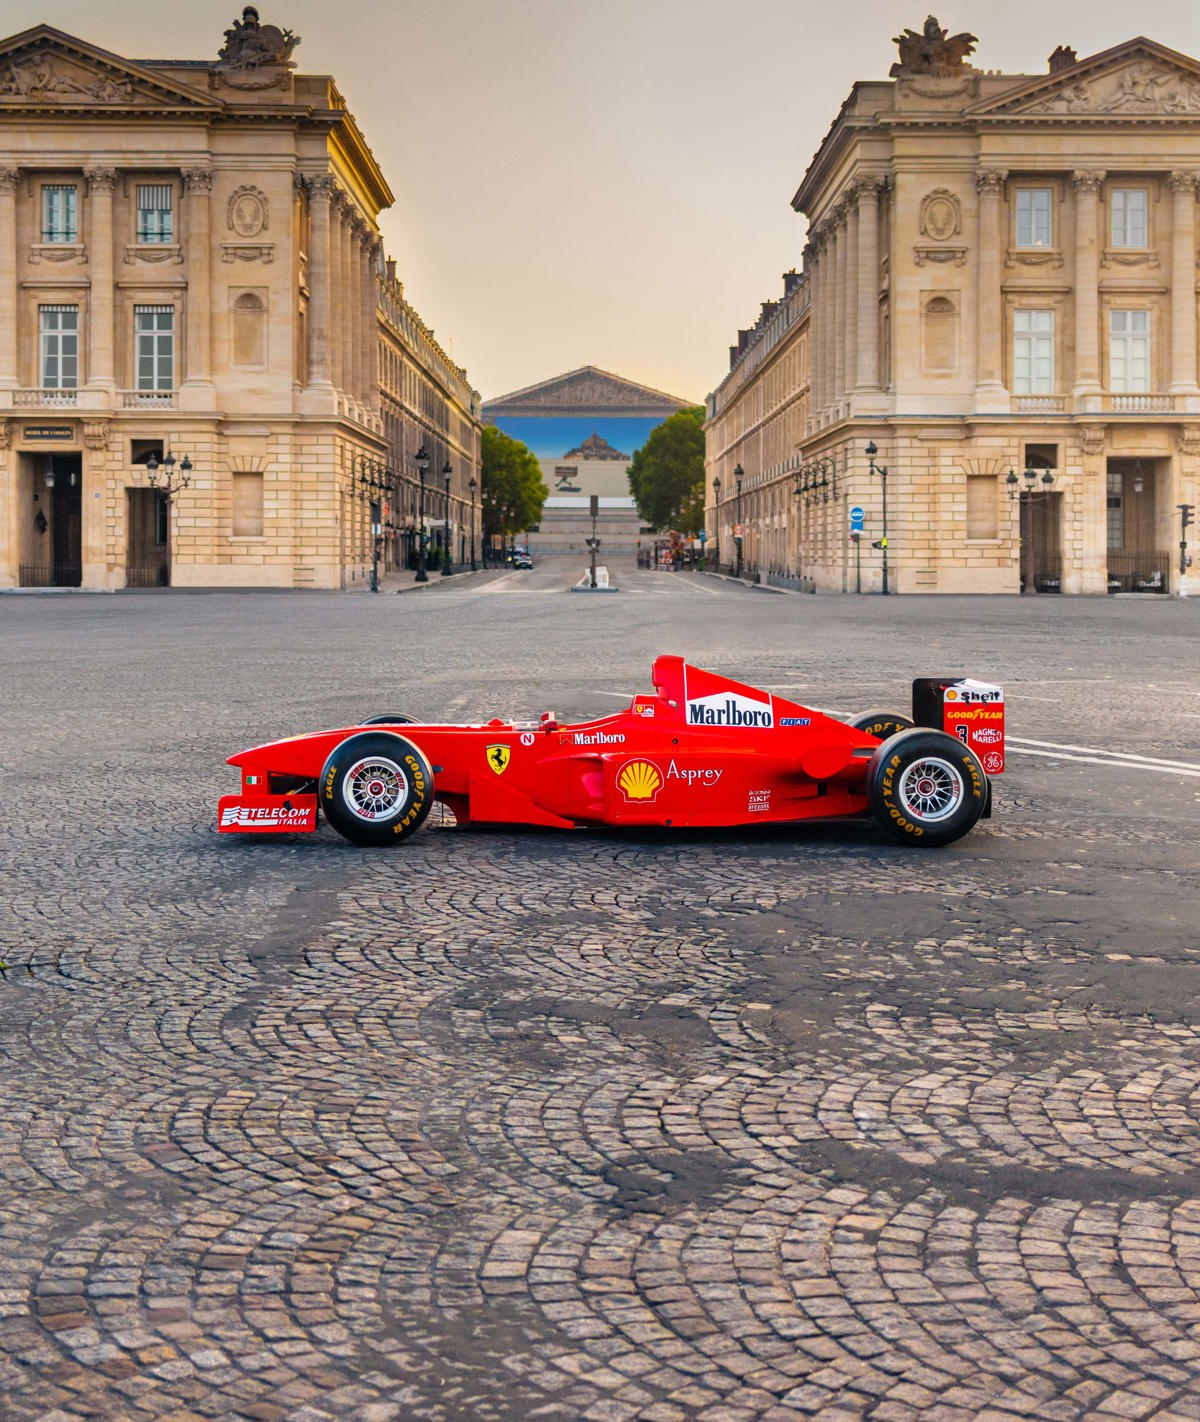 1998 Ferrari F300 offered at RM Sotheby’s Monterey live auction 2022